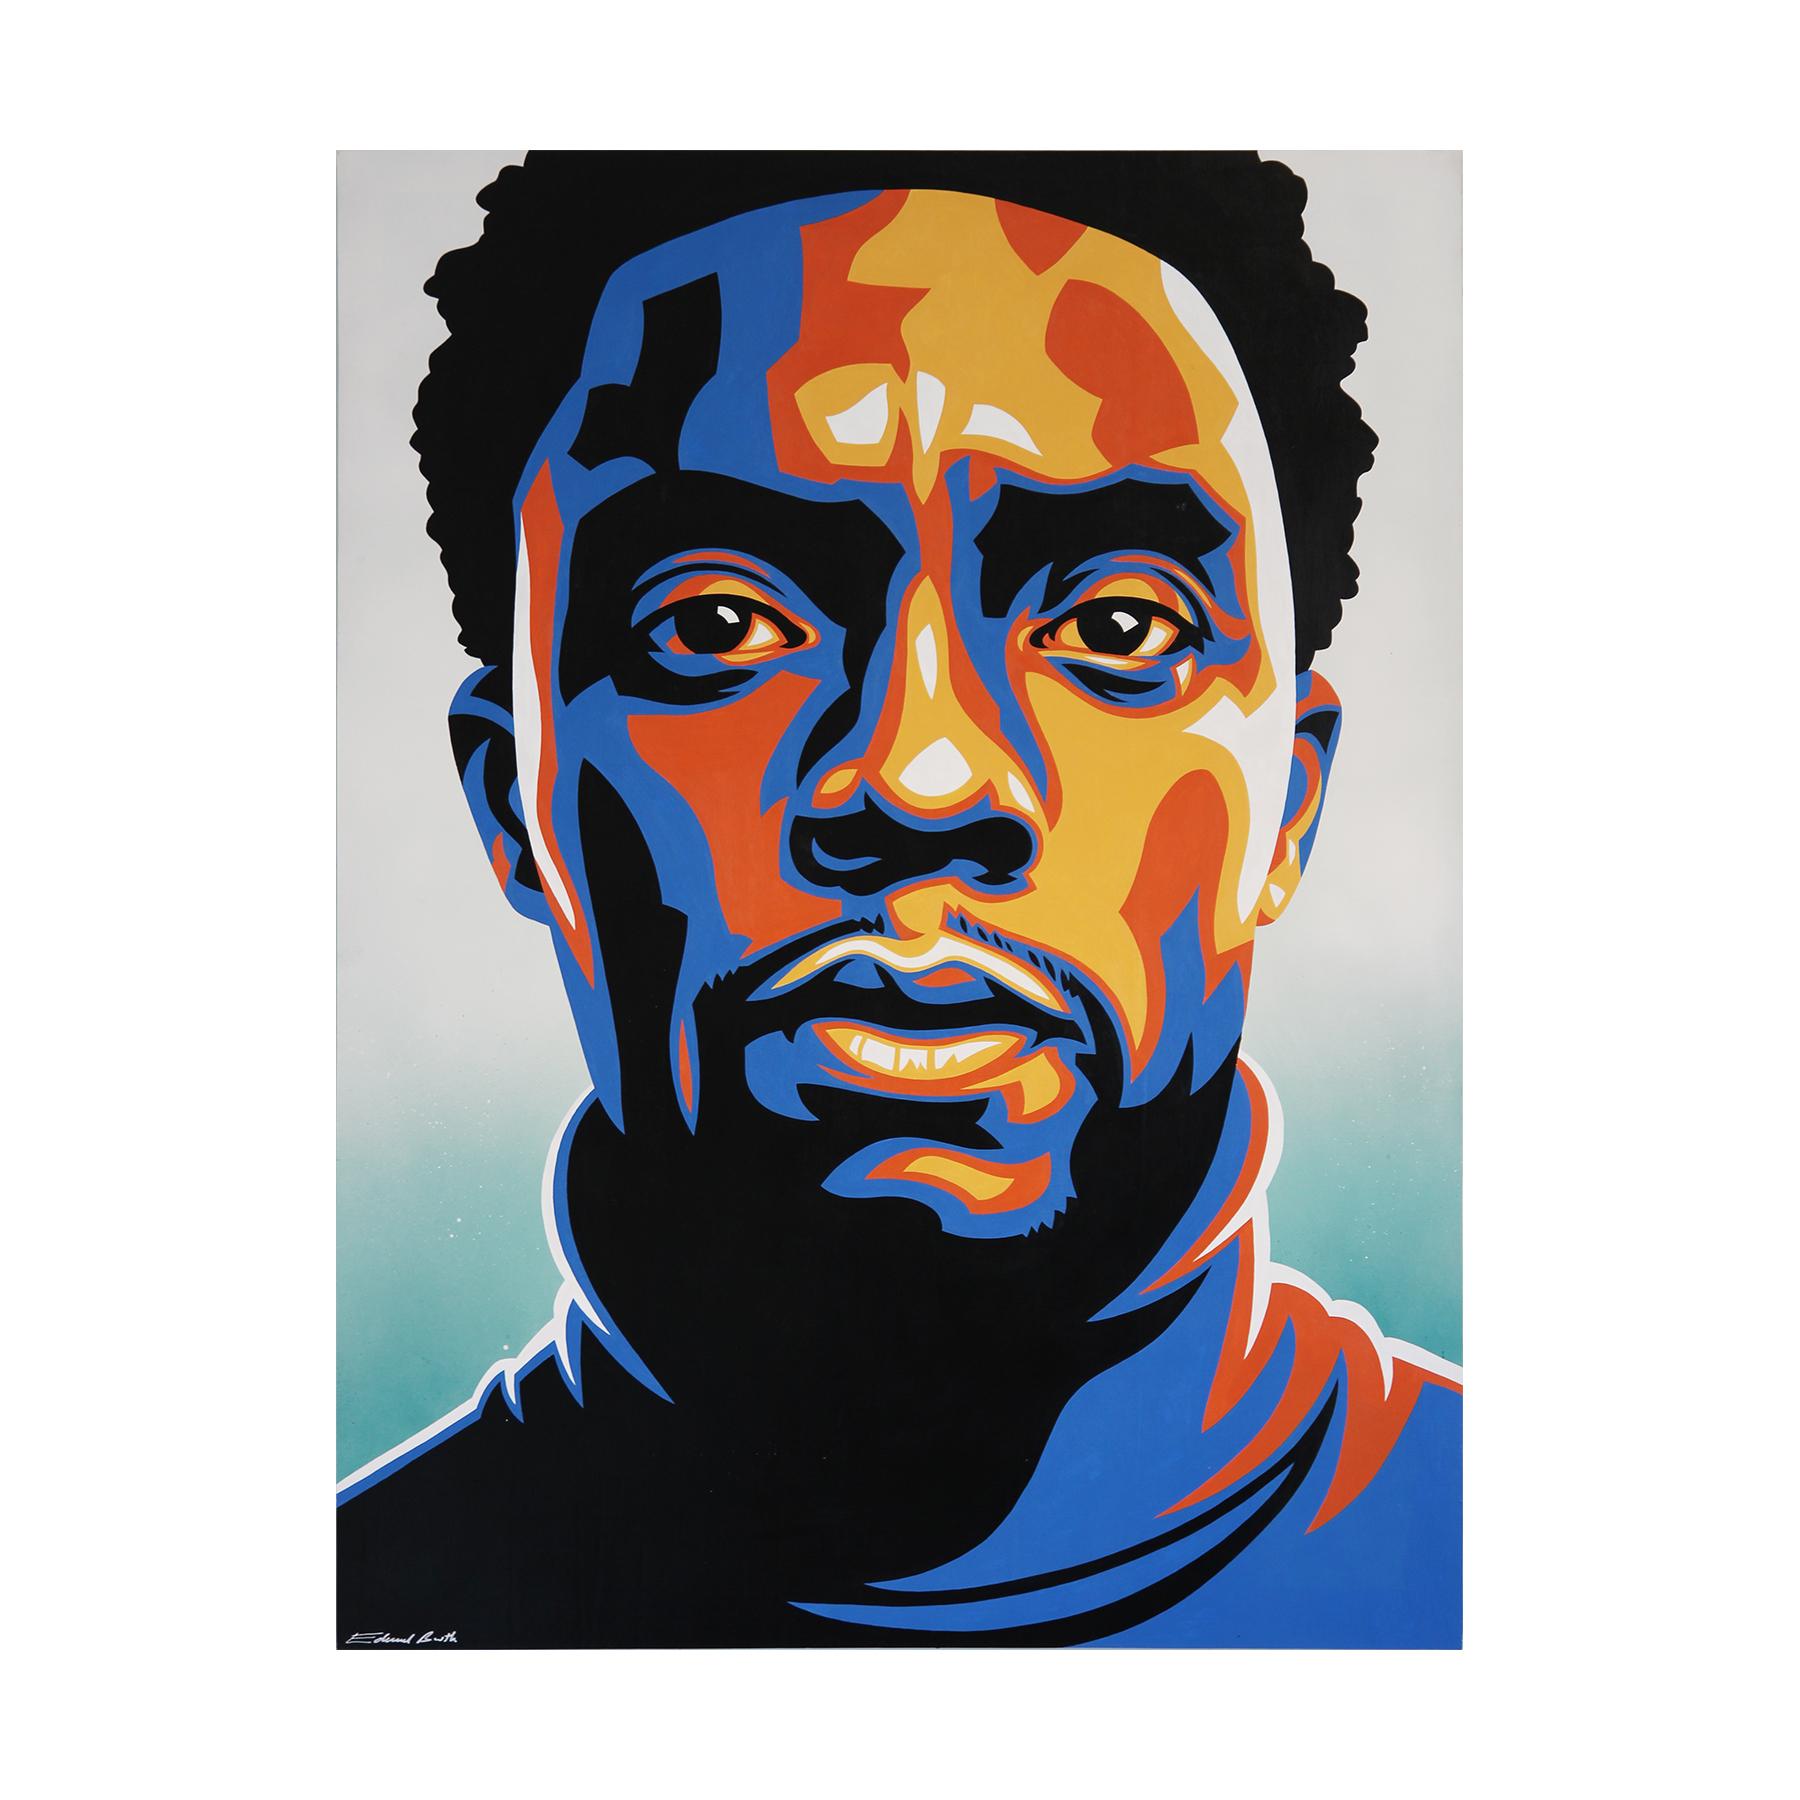 Ed Booth Abstract Painting - Chadwick Boseman “Black Panther” Teal, Blue, Orange, and Yellow Modern Portrait